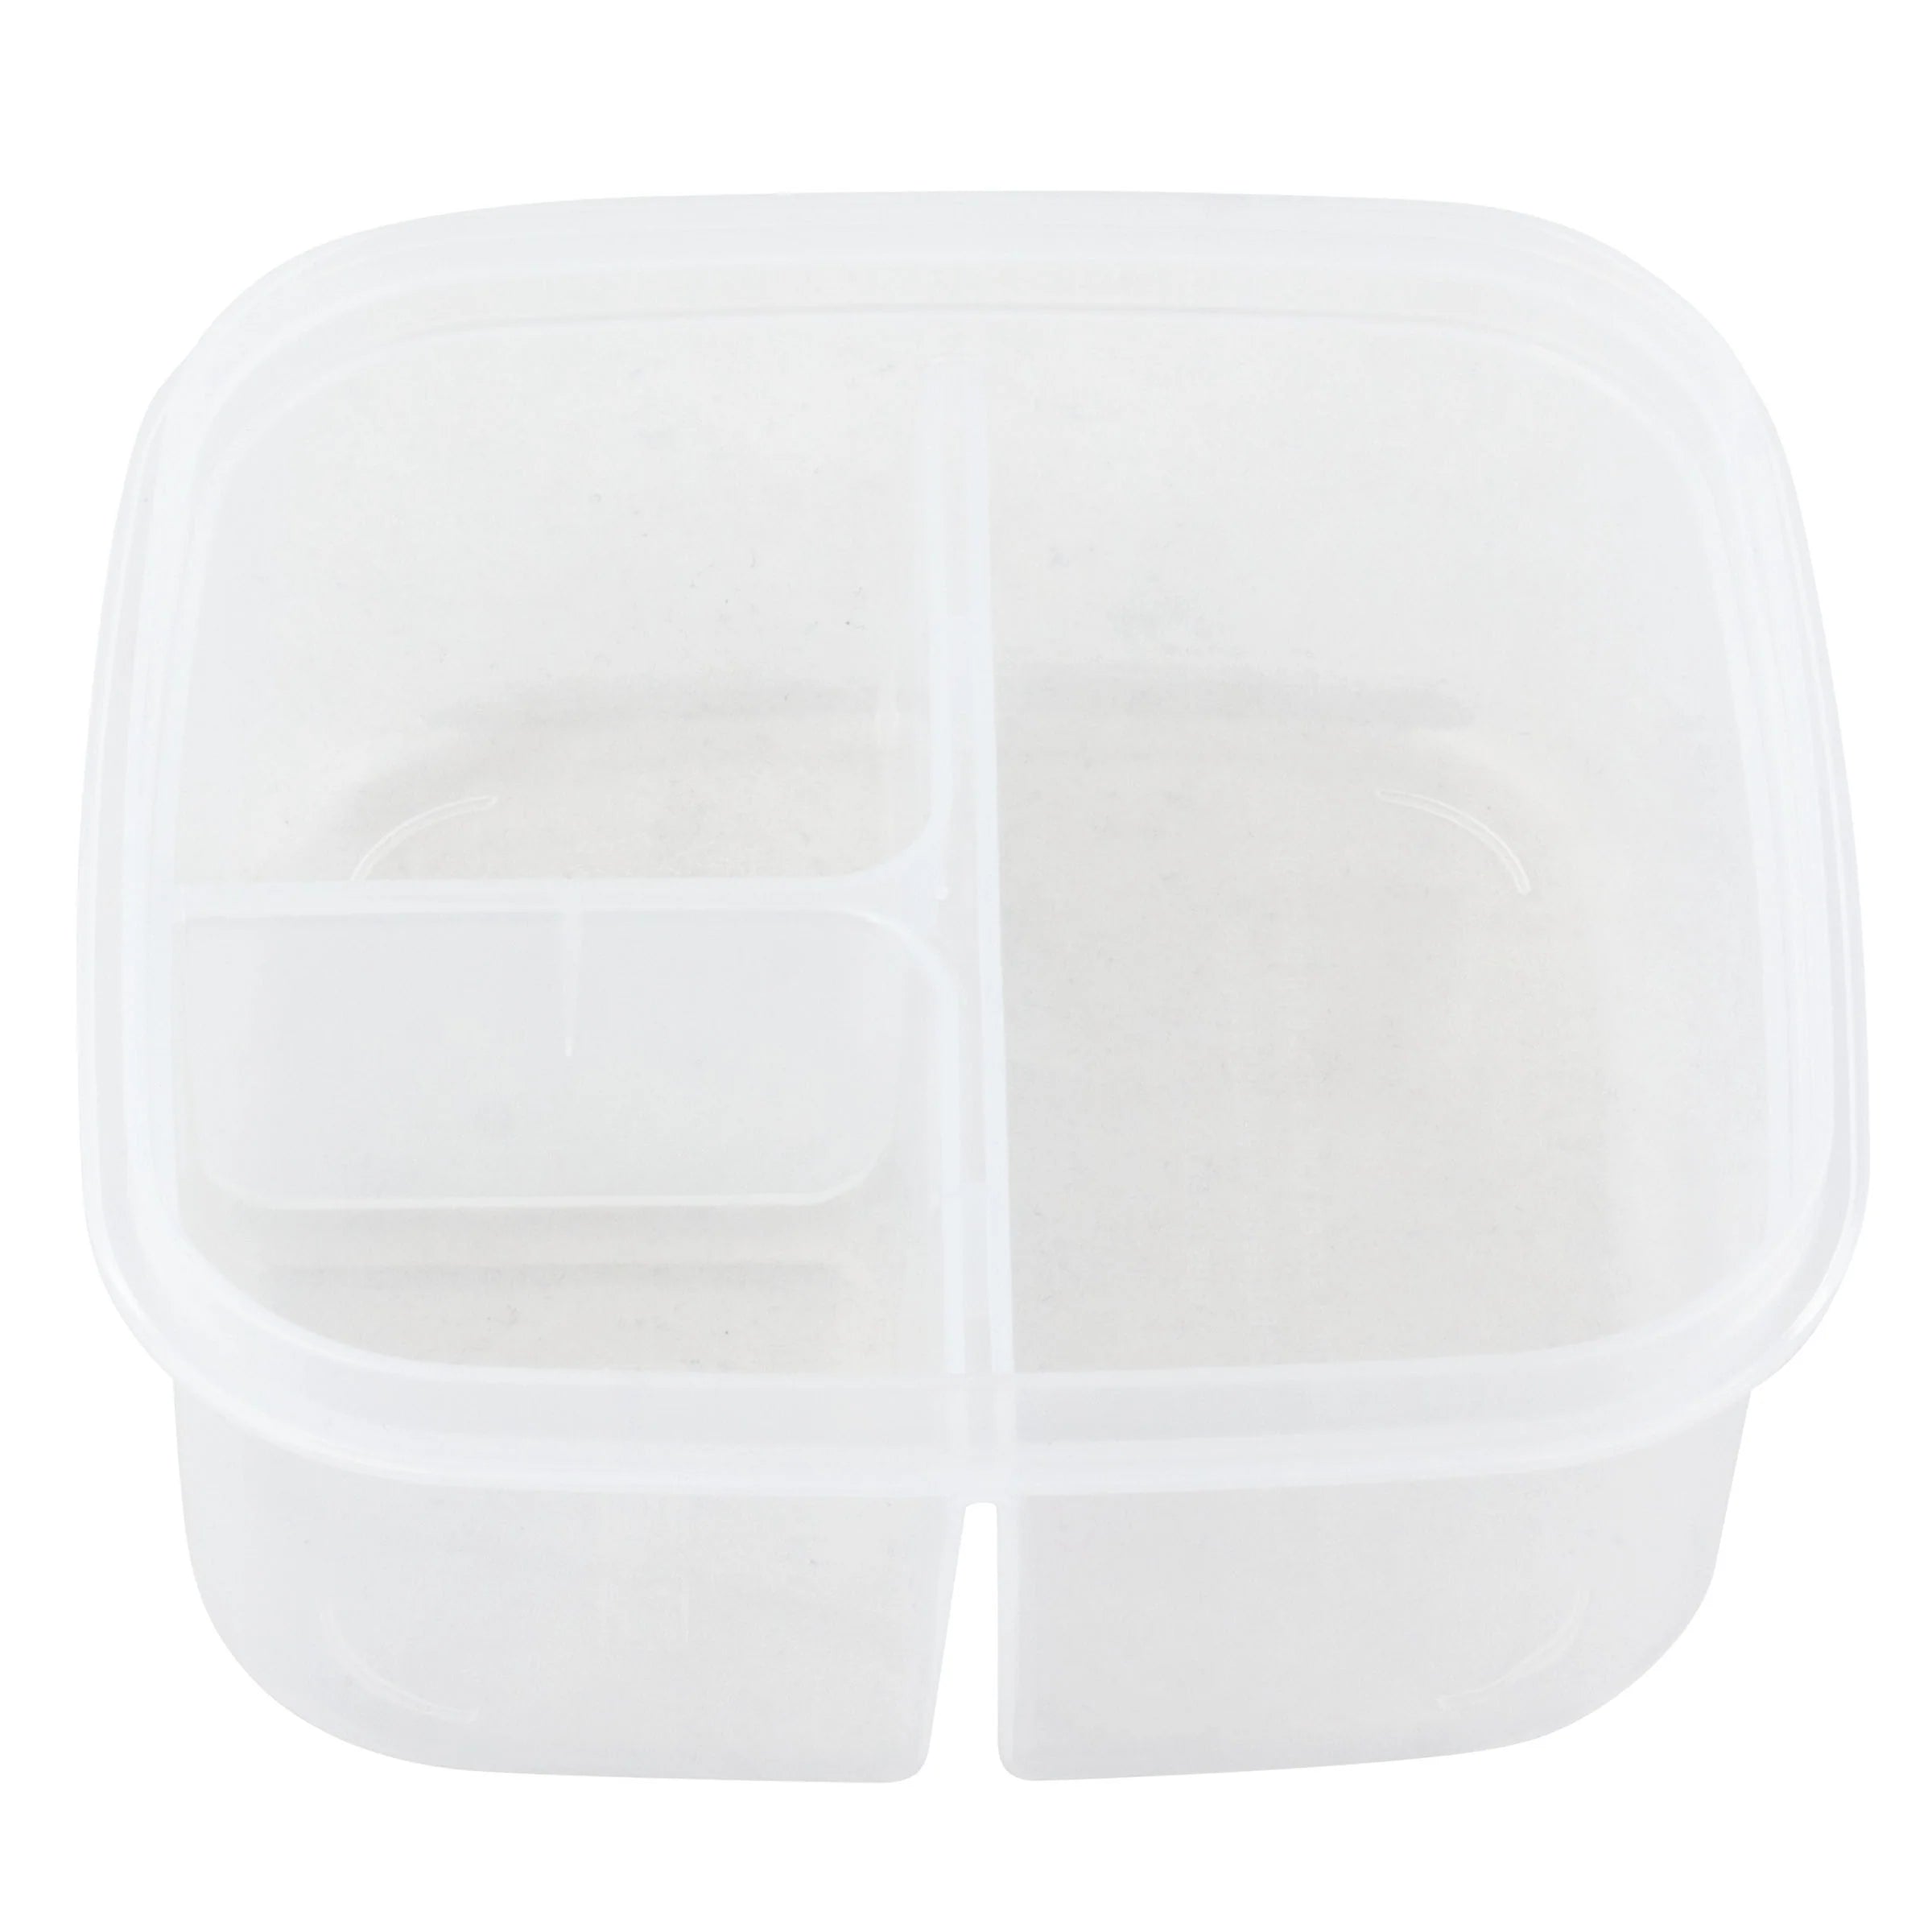 Snack Box with Ice-Pack Construction